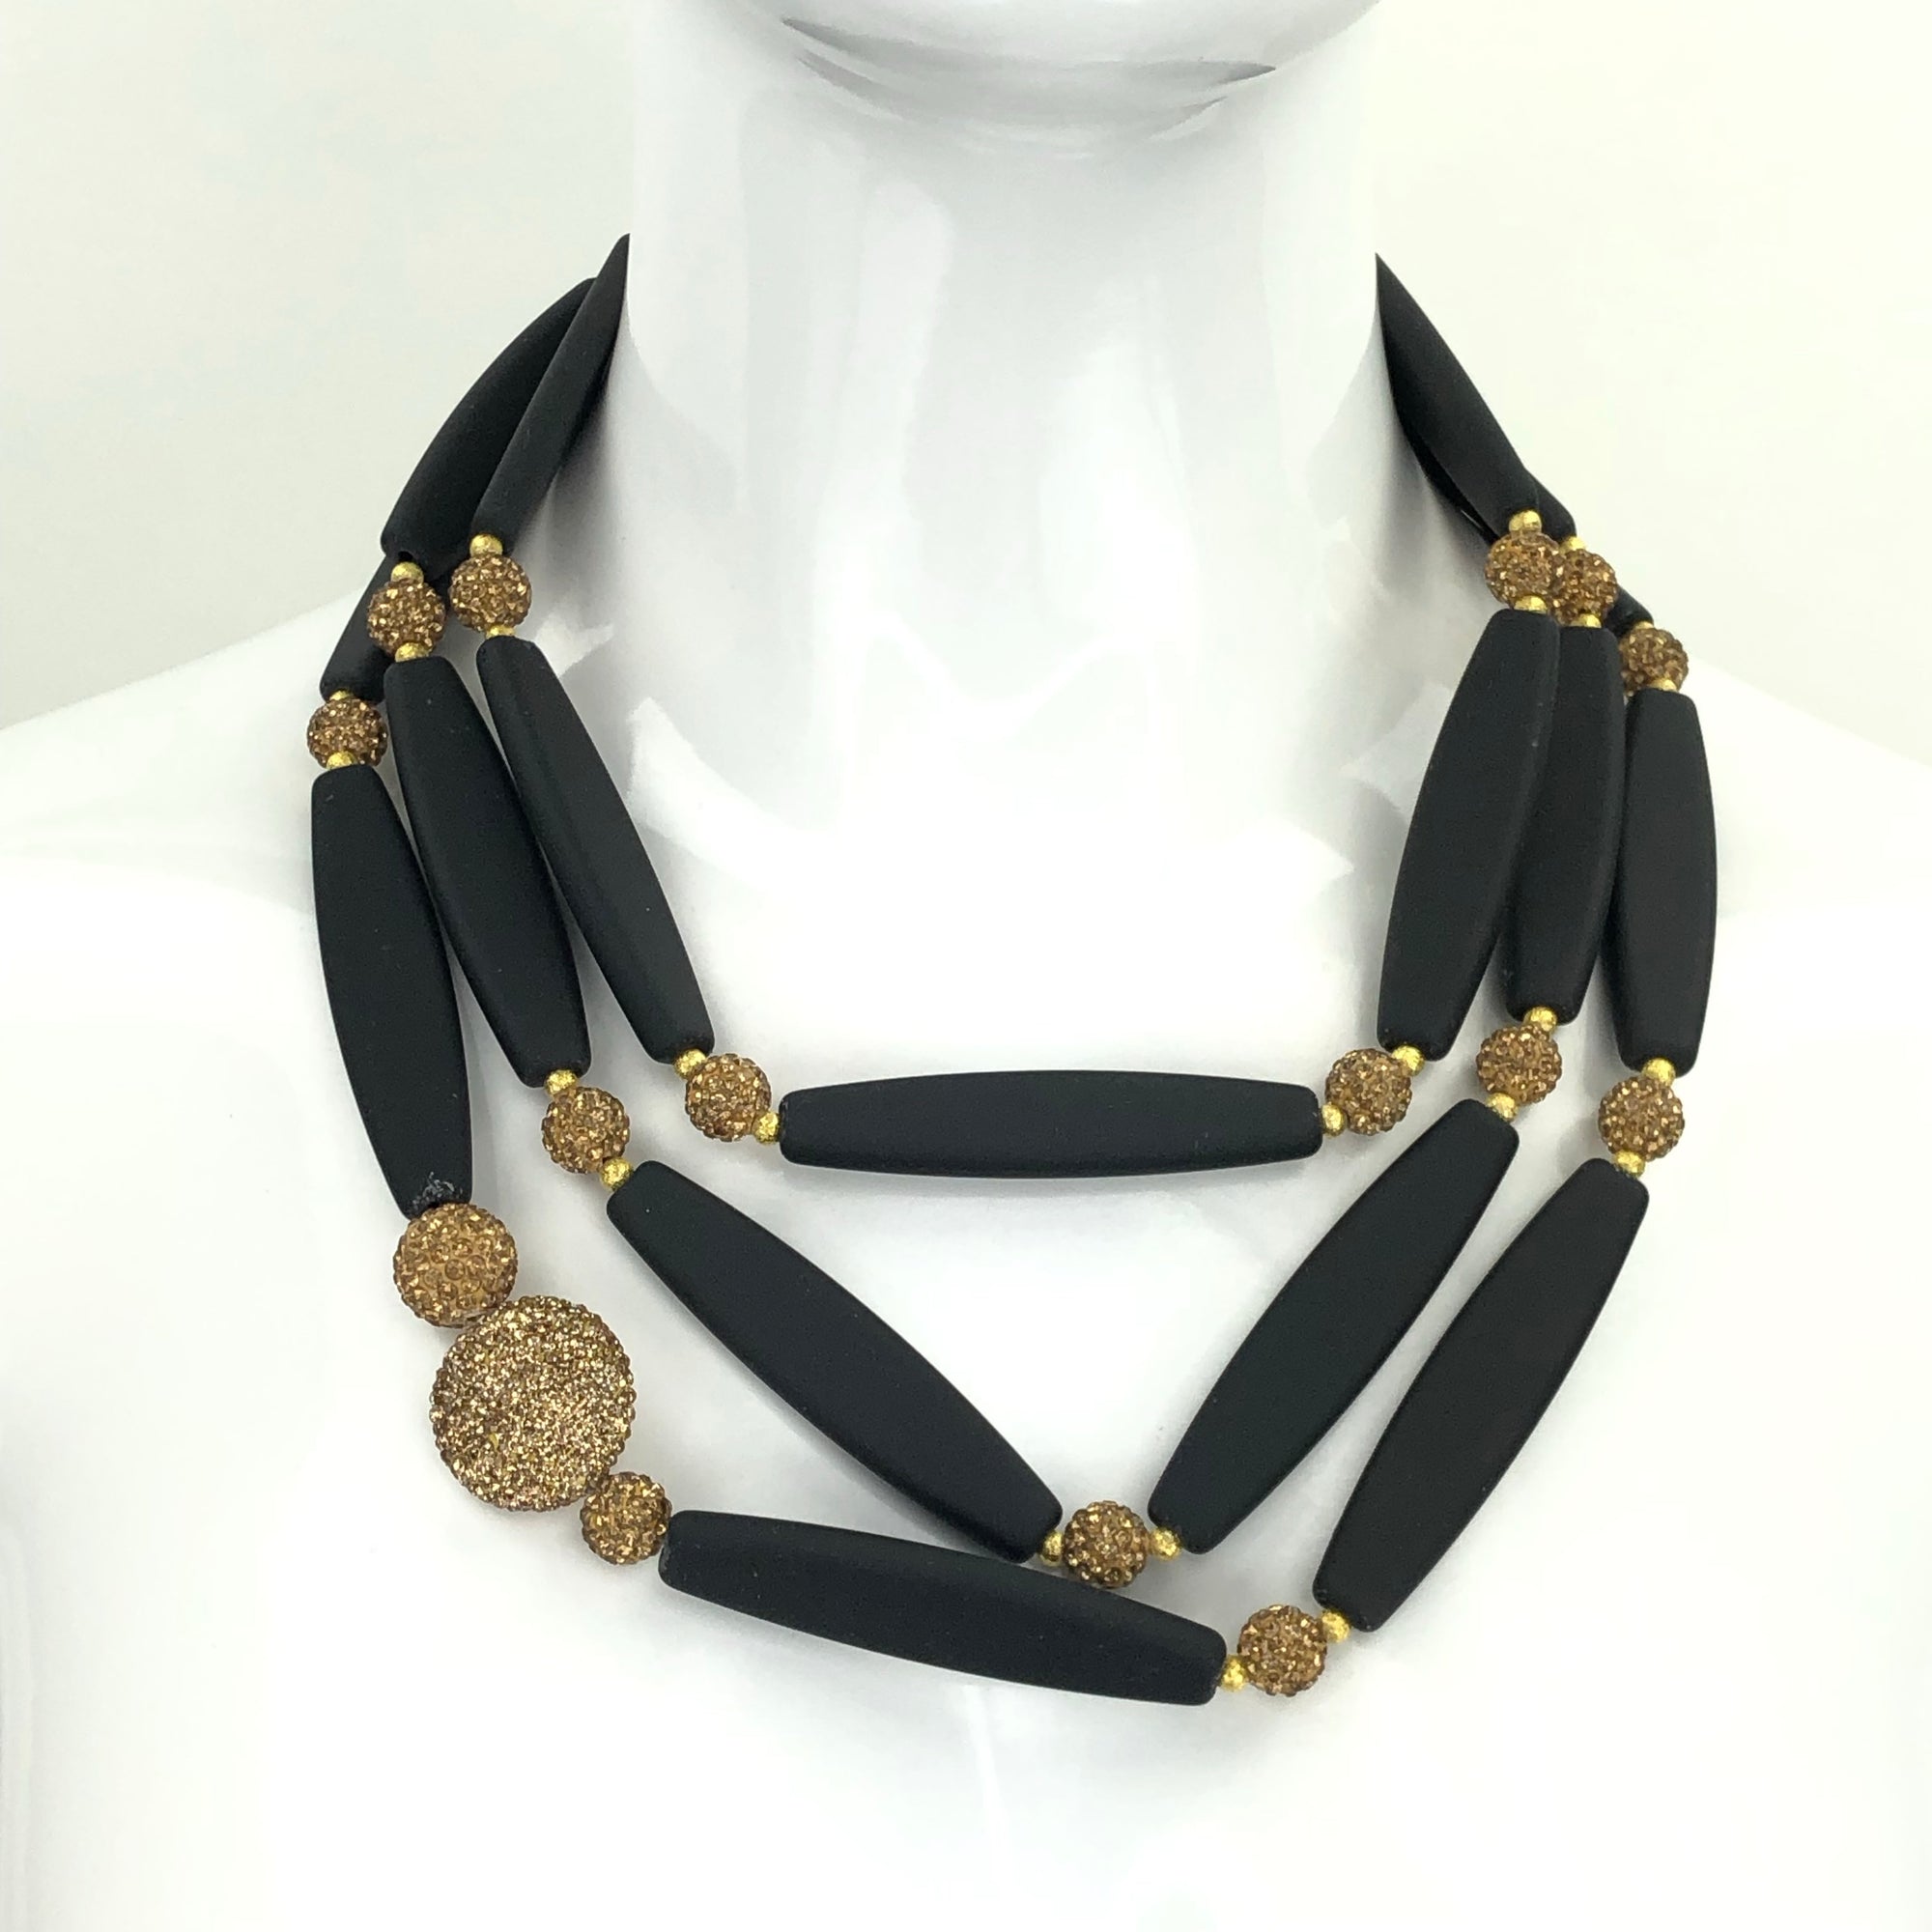 Midnight Dance Necklace necklaces Cerese D, Inc. Gold  